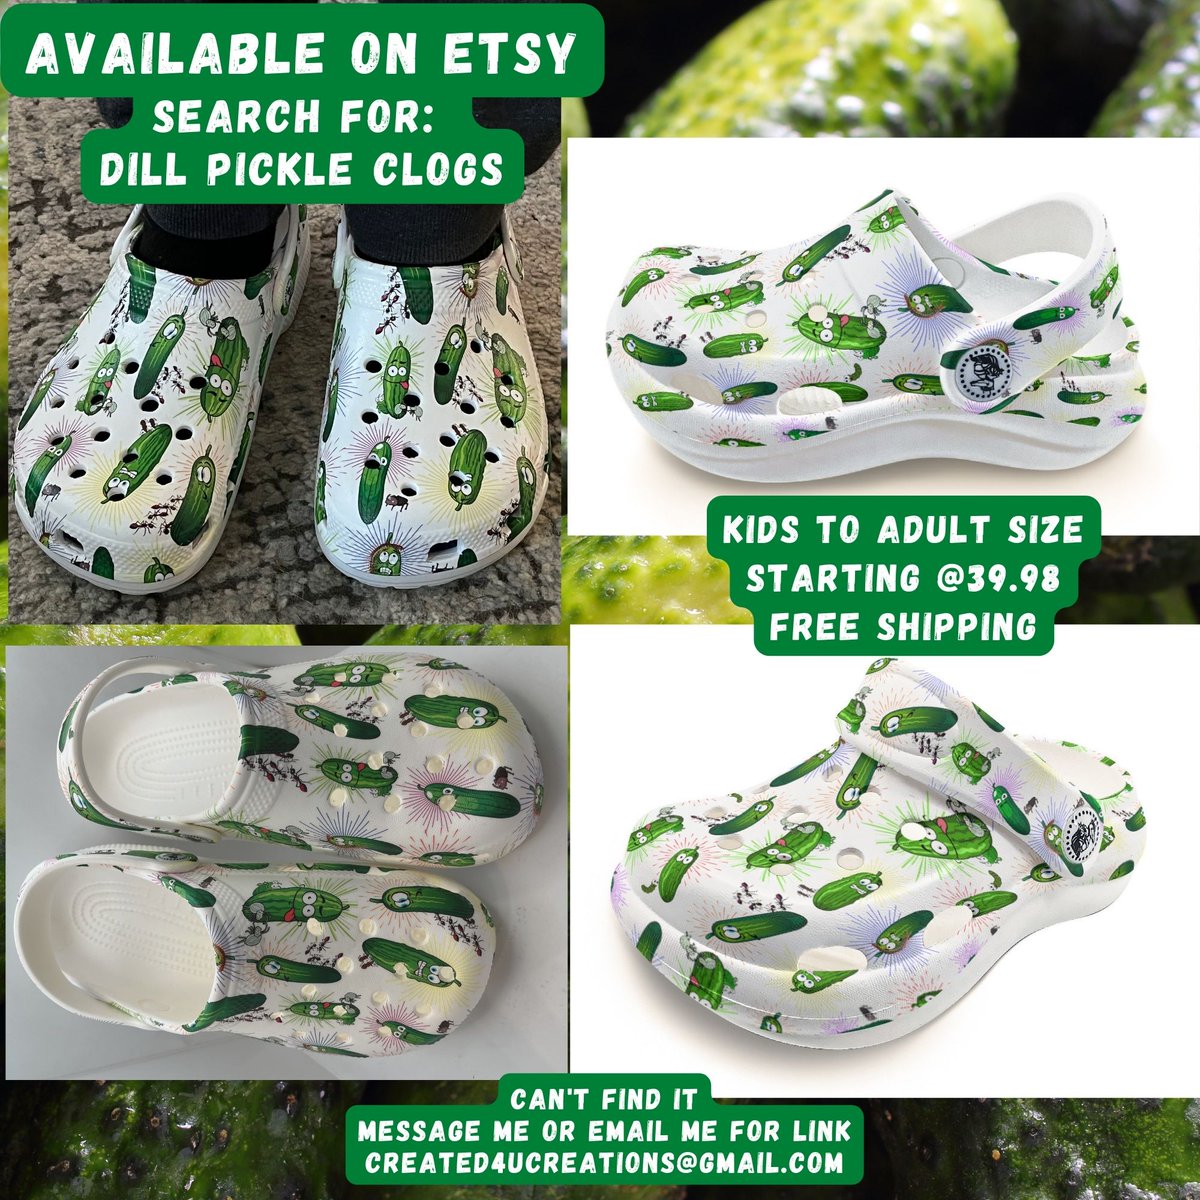 Something Fun for all. Waterproof, easy on and easy off, Dylbug Shoes. #pickles #pickle #picklelover #picklelovers #funshoes #crazyshoes #waterproofshoes #kidsshoes  #funshoes